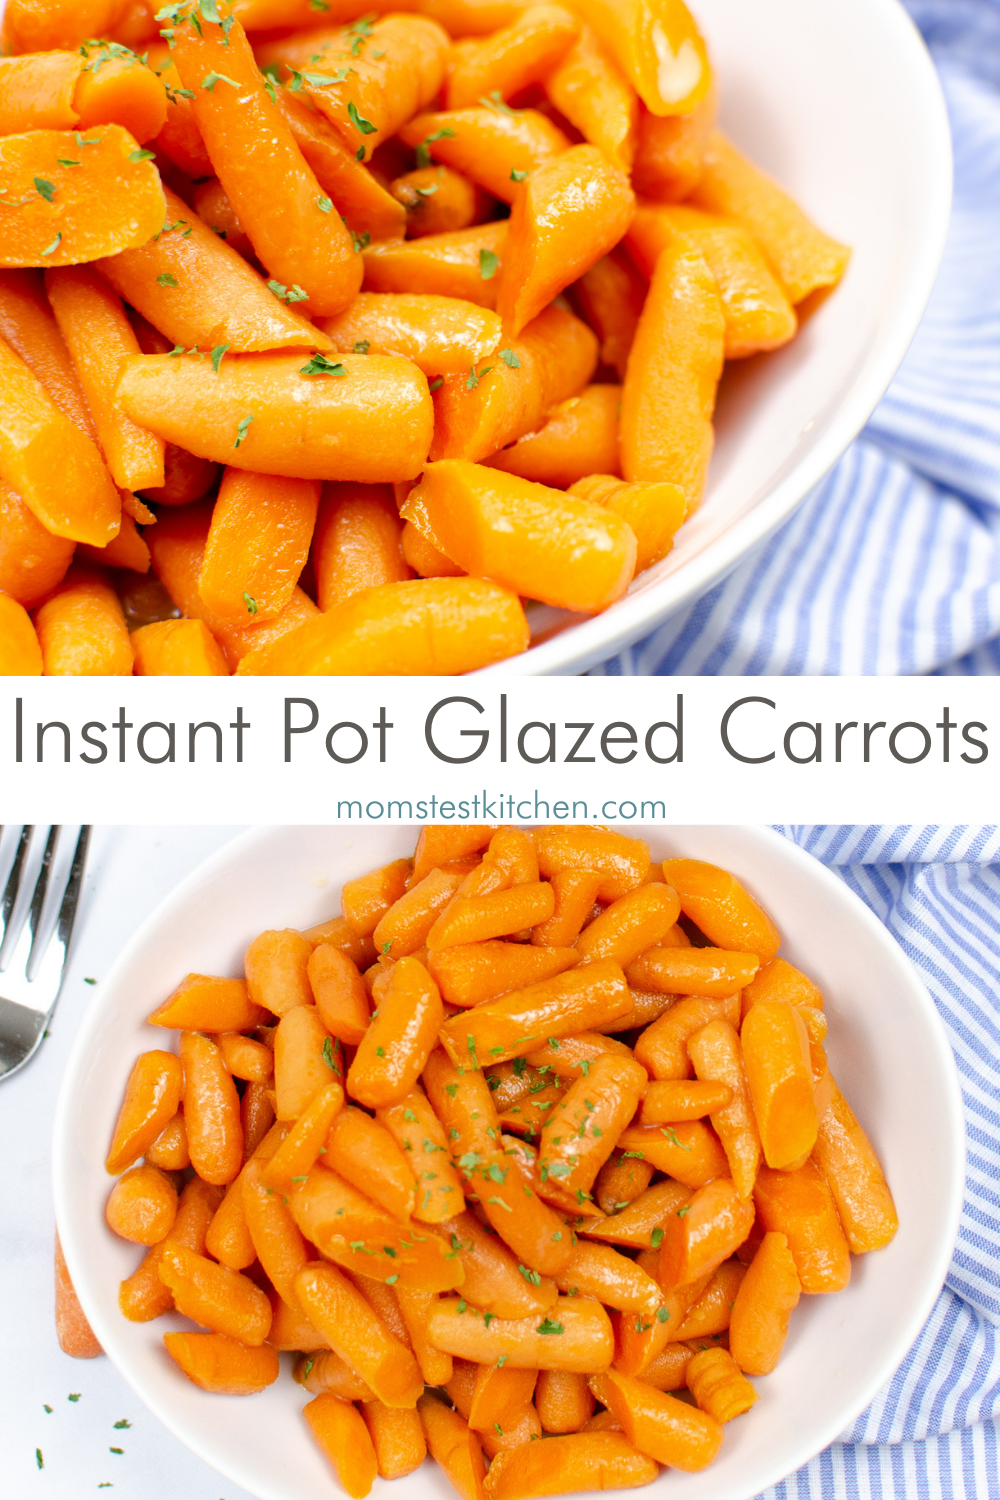 These quick and easy Instant Pot Brown Sugar Glazed Carrots are a crowd pleaser for the Holidays or at any weeknight dinner!